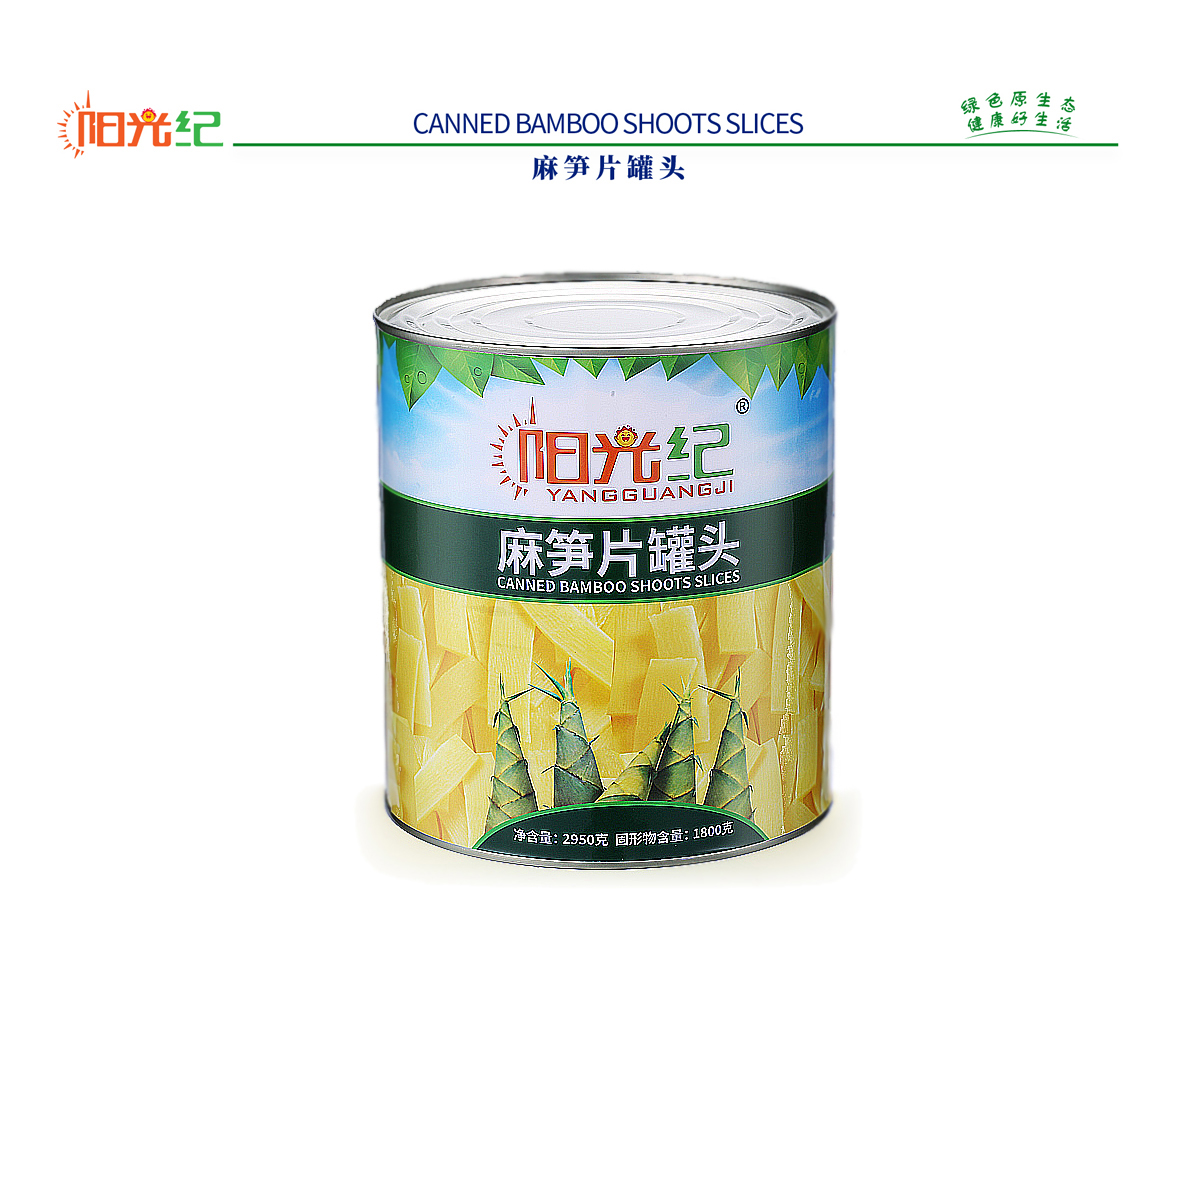 CANNED BAMBOO SHOOTS SLICES 2950G